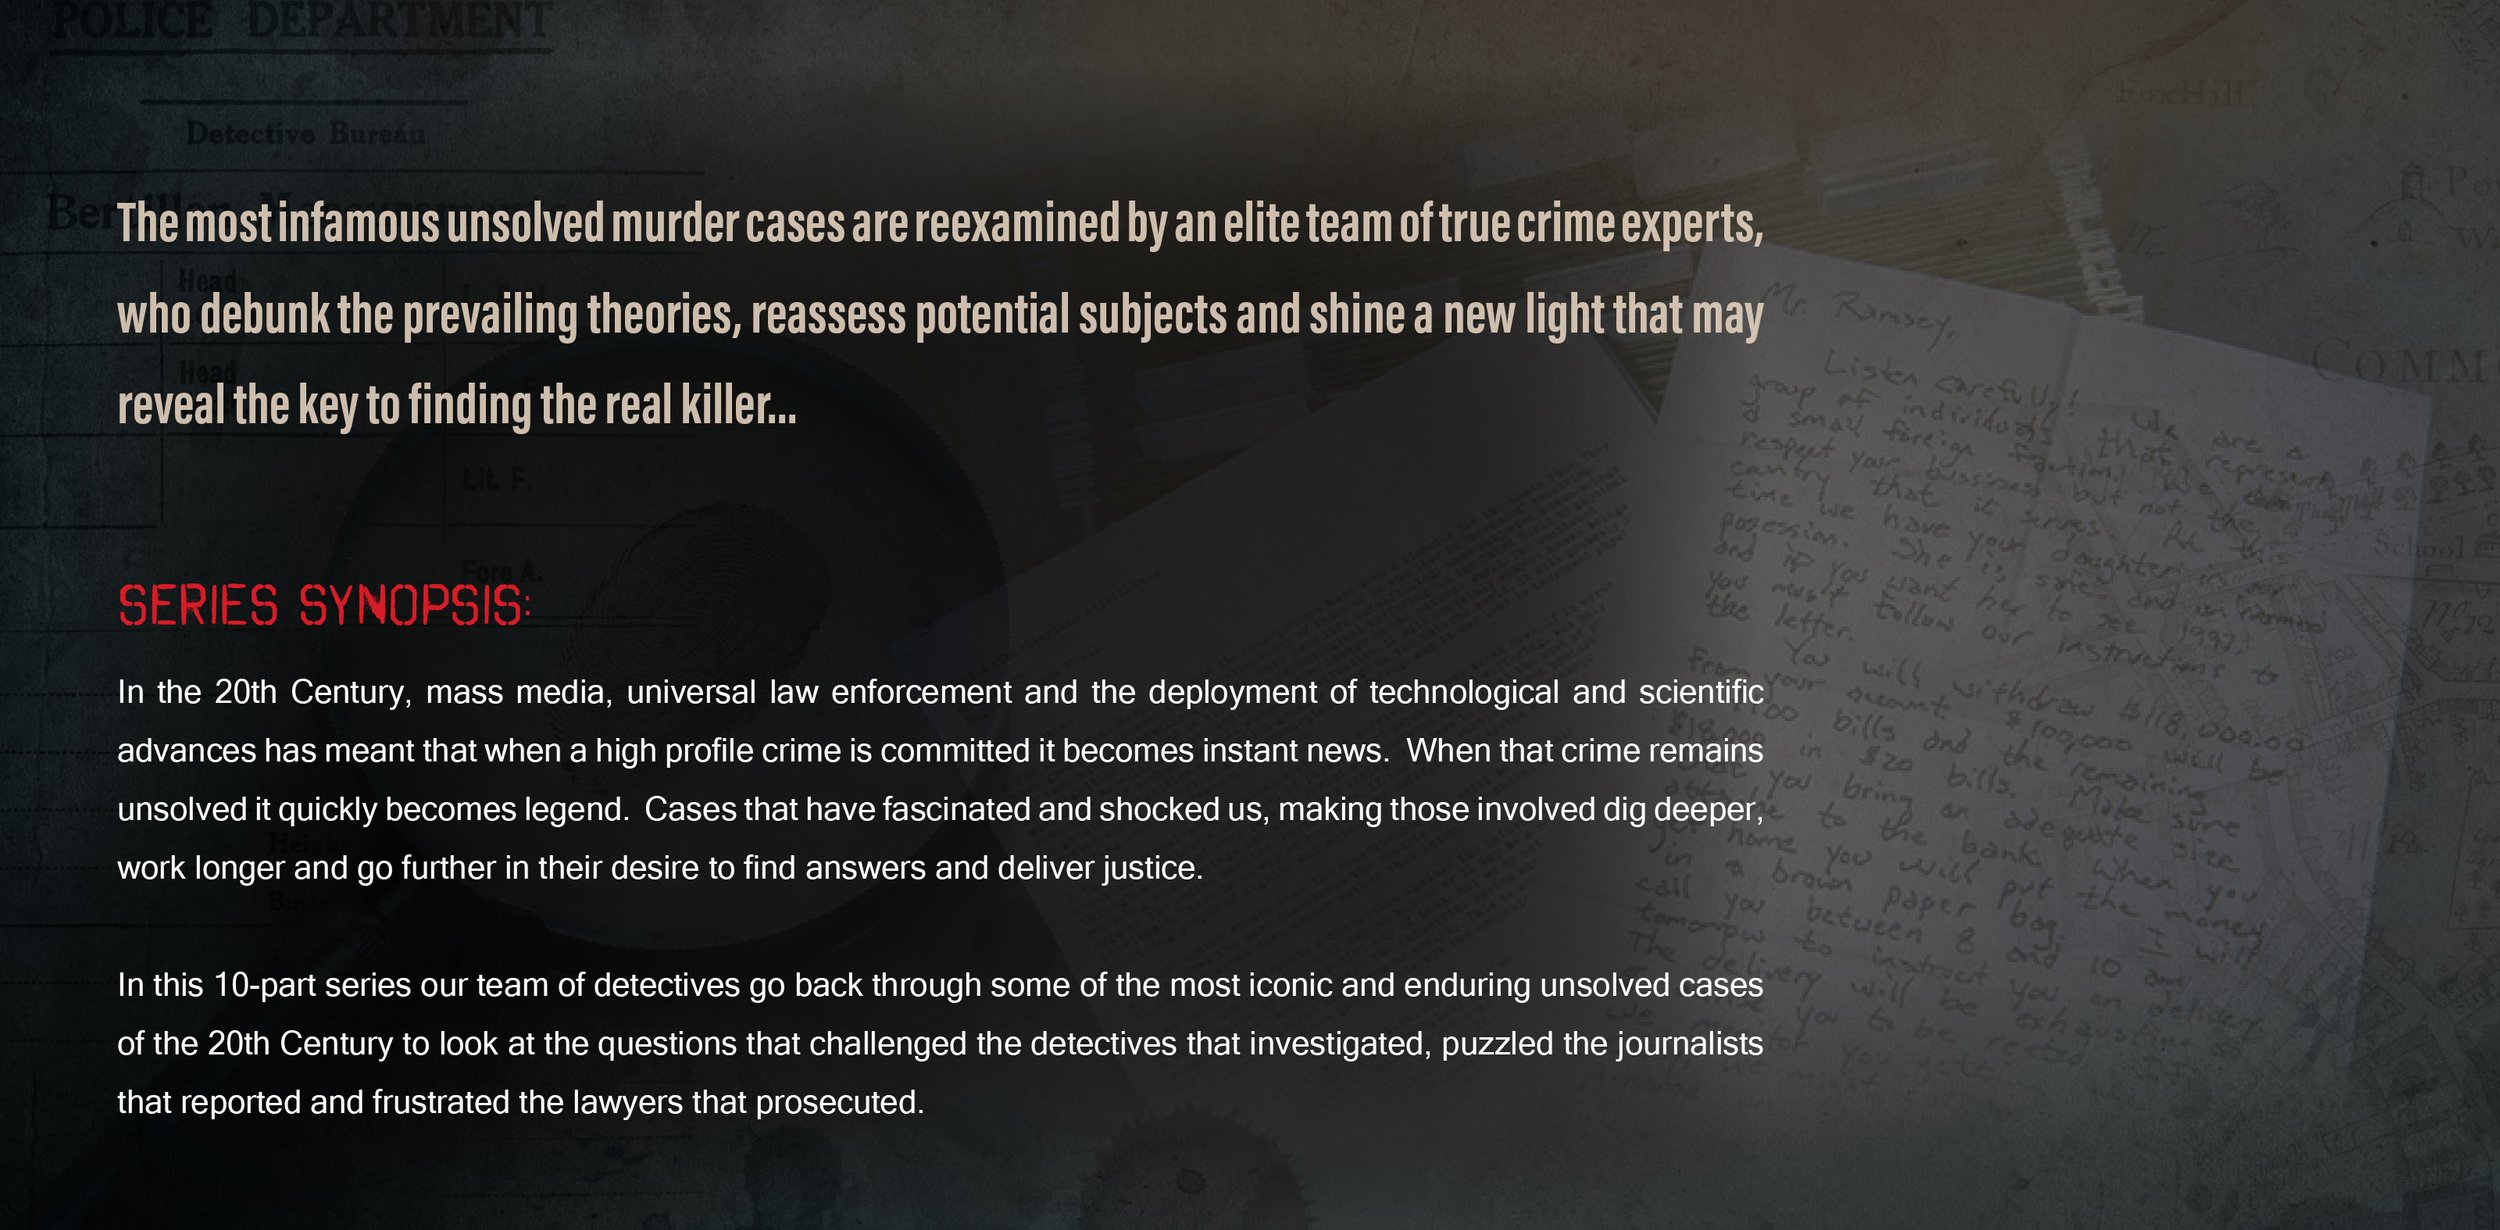 Truthseekers_Unsolved_Crimes_Treatment_V12.jpg